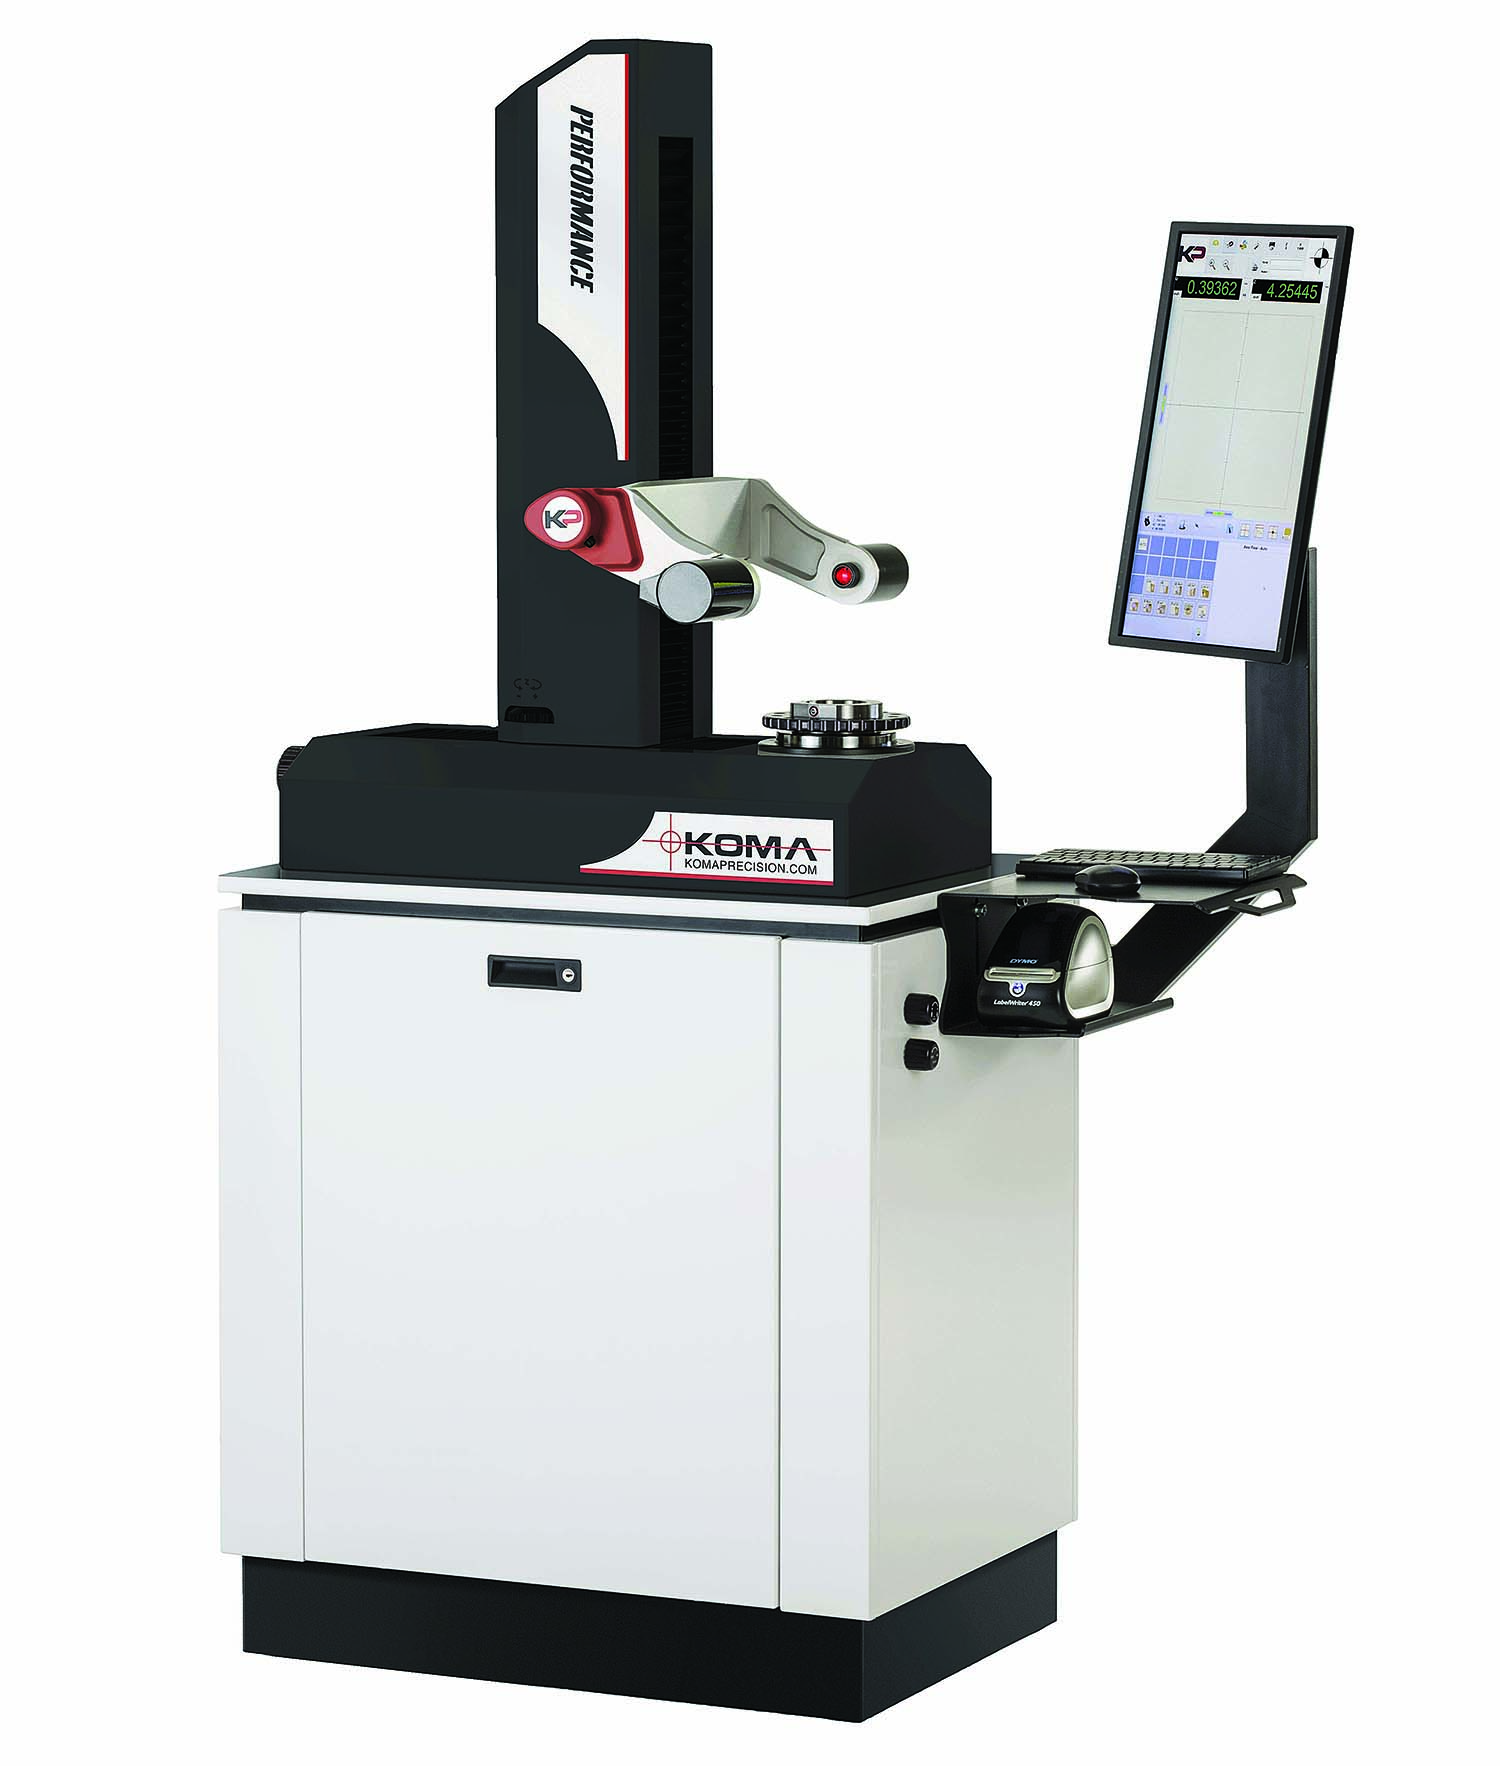 Features of the Performance presetter include an ergonomic design and easy-to-use software.